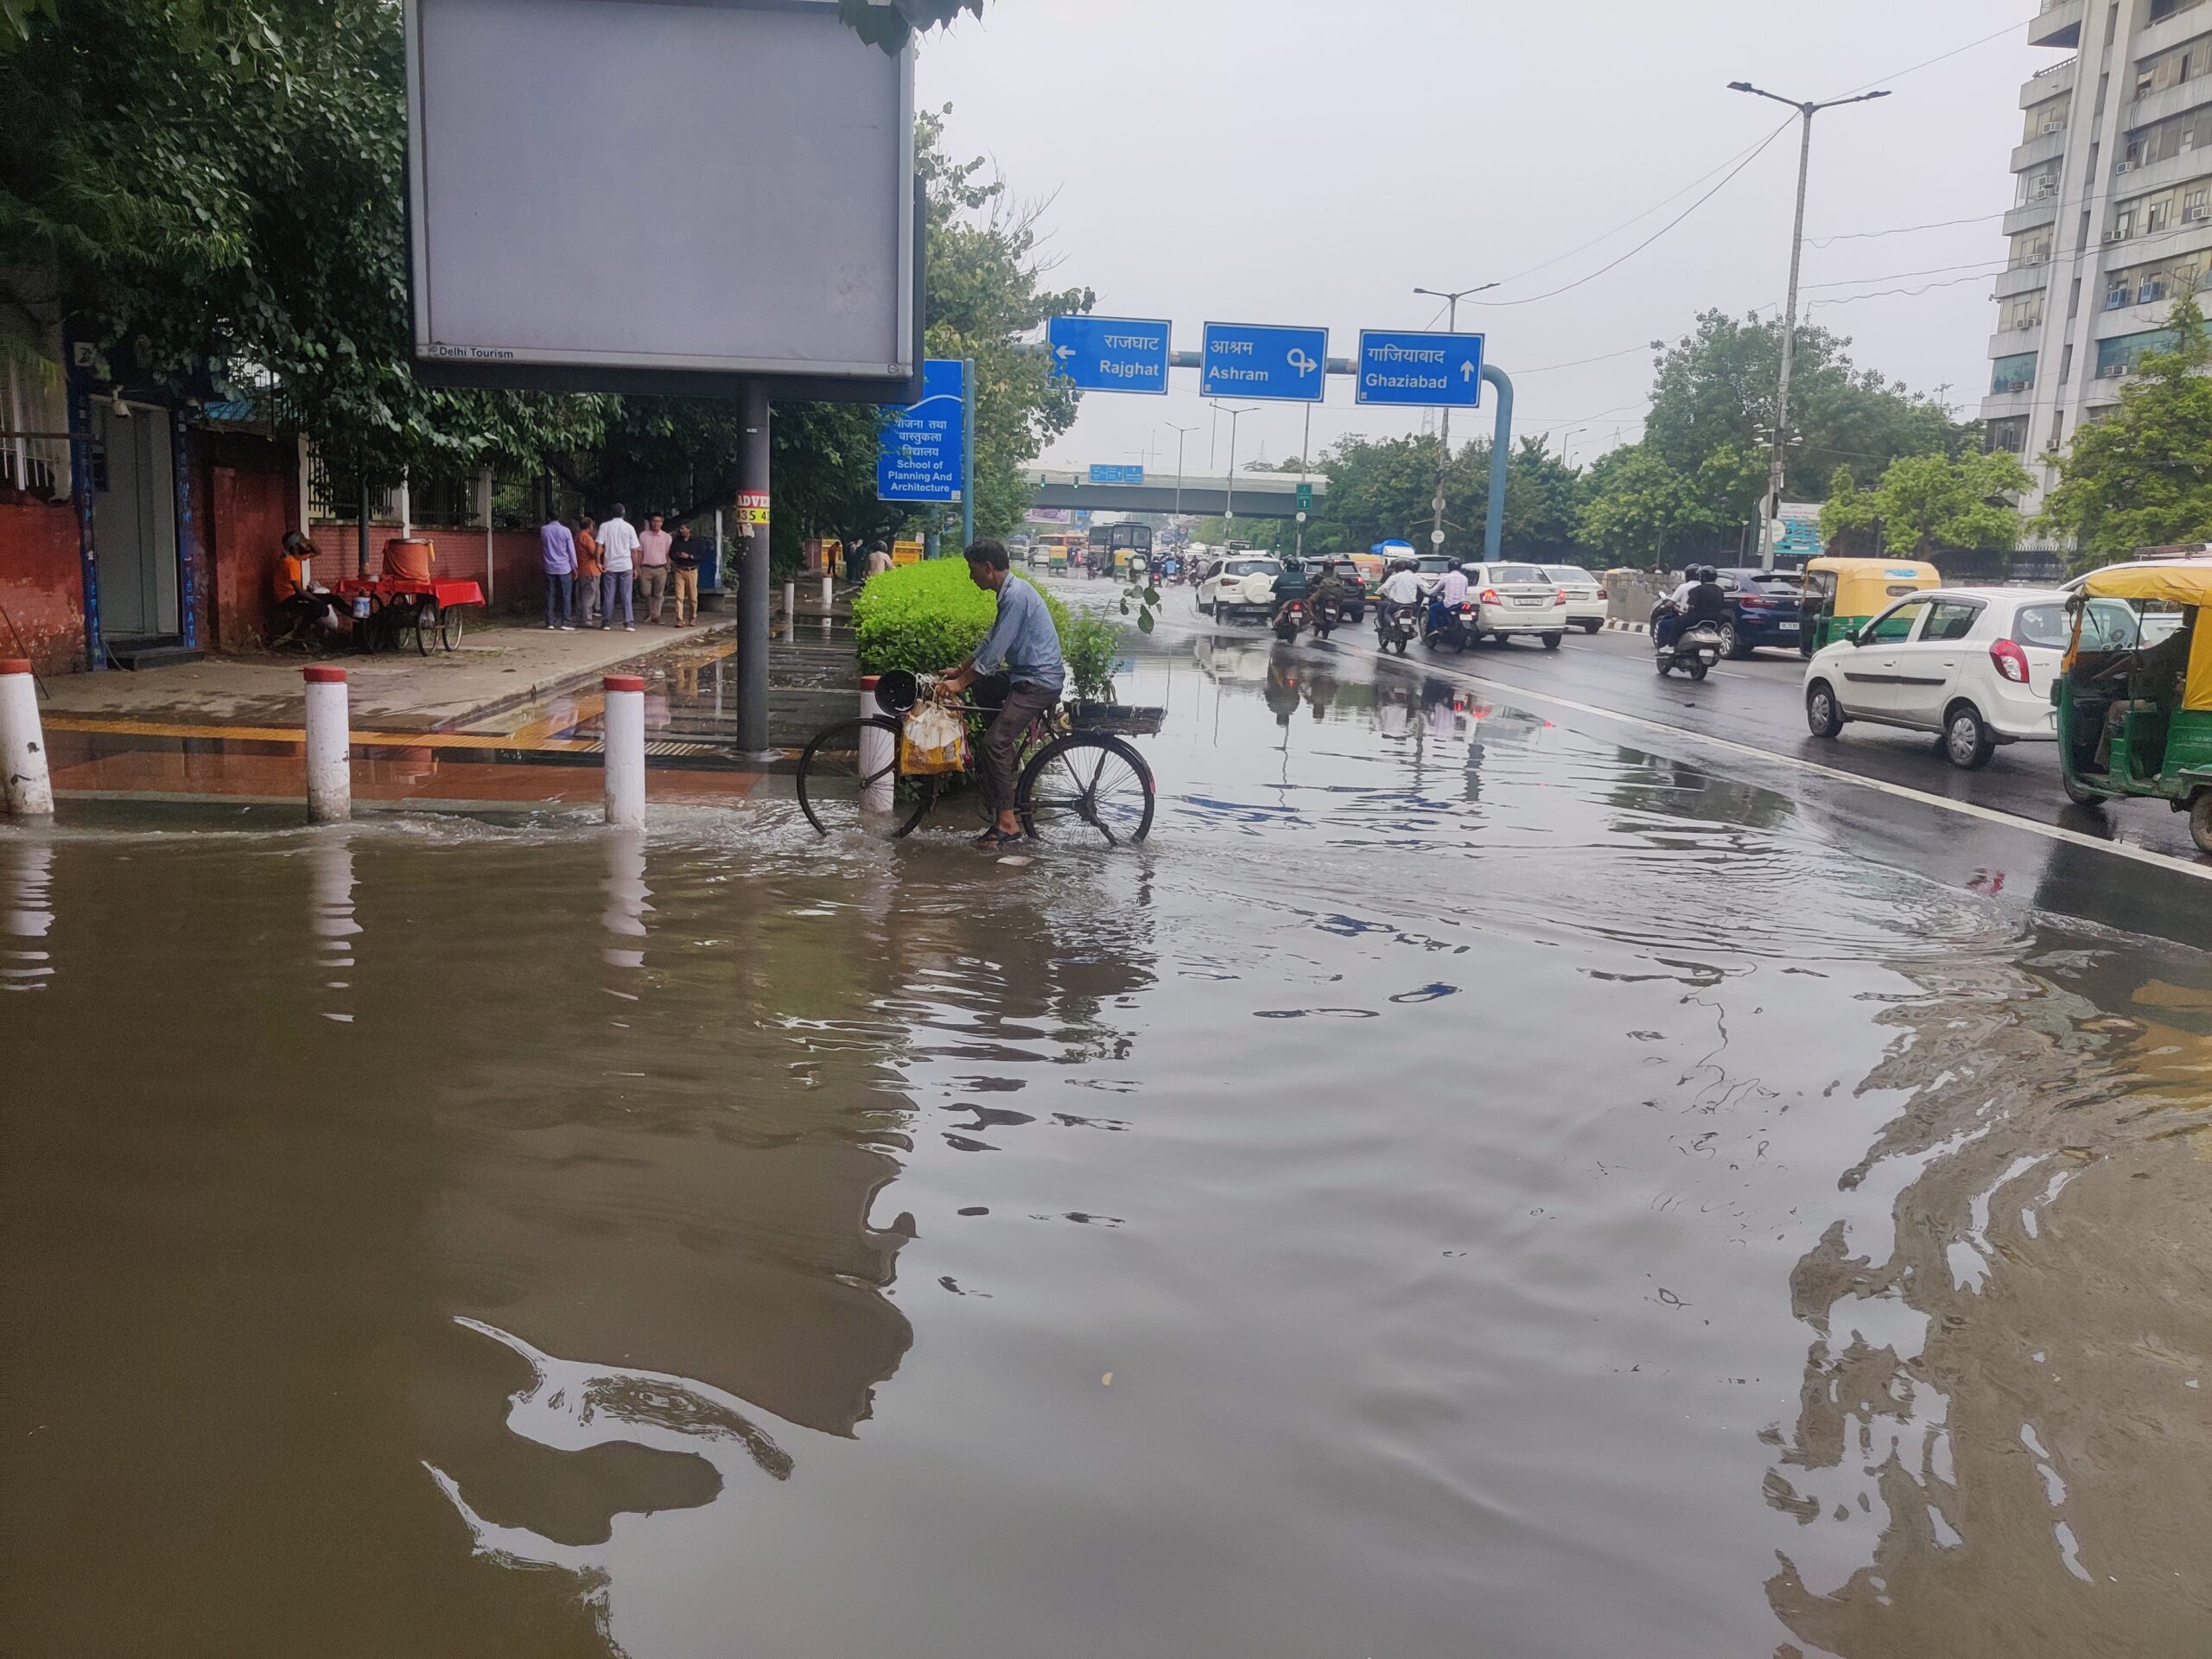 Delhi floods: Regulator that led to flooding at ITO to be fixed in next 3-4 hours, says Kejriwal